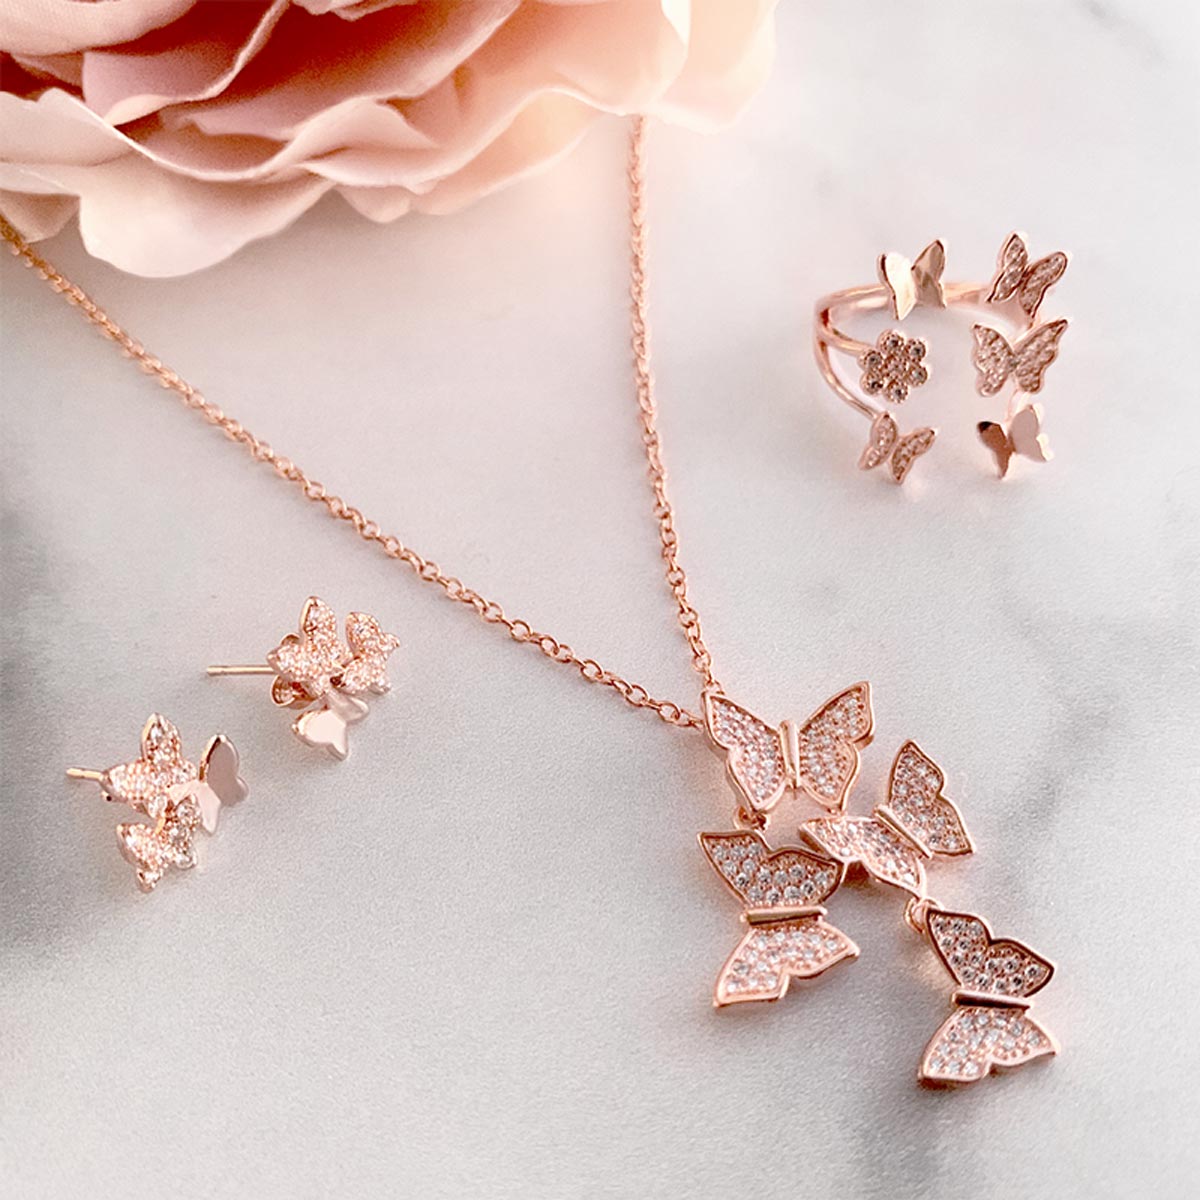 Free Spirit Rose Gold Butterfly Super Bundle with Free Butterfly Charm Bracelets